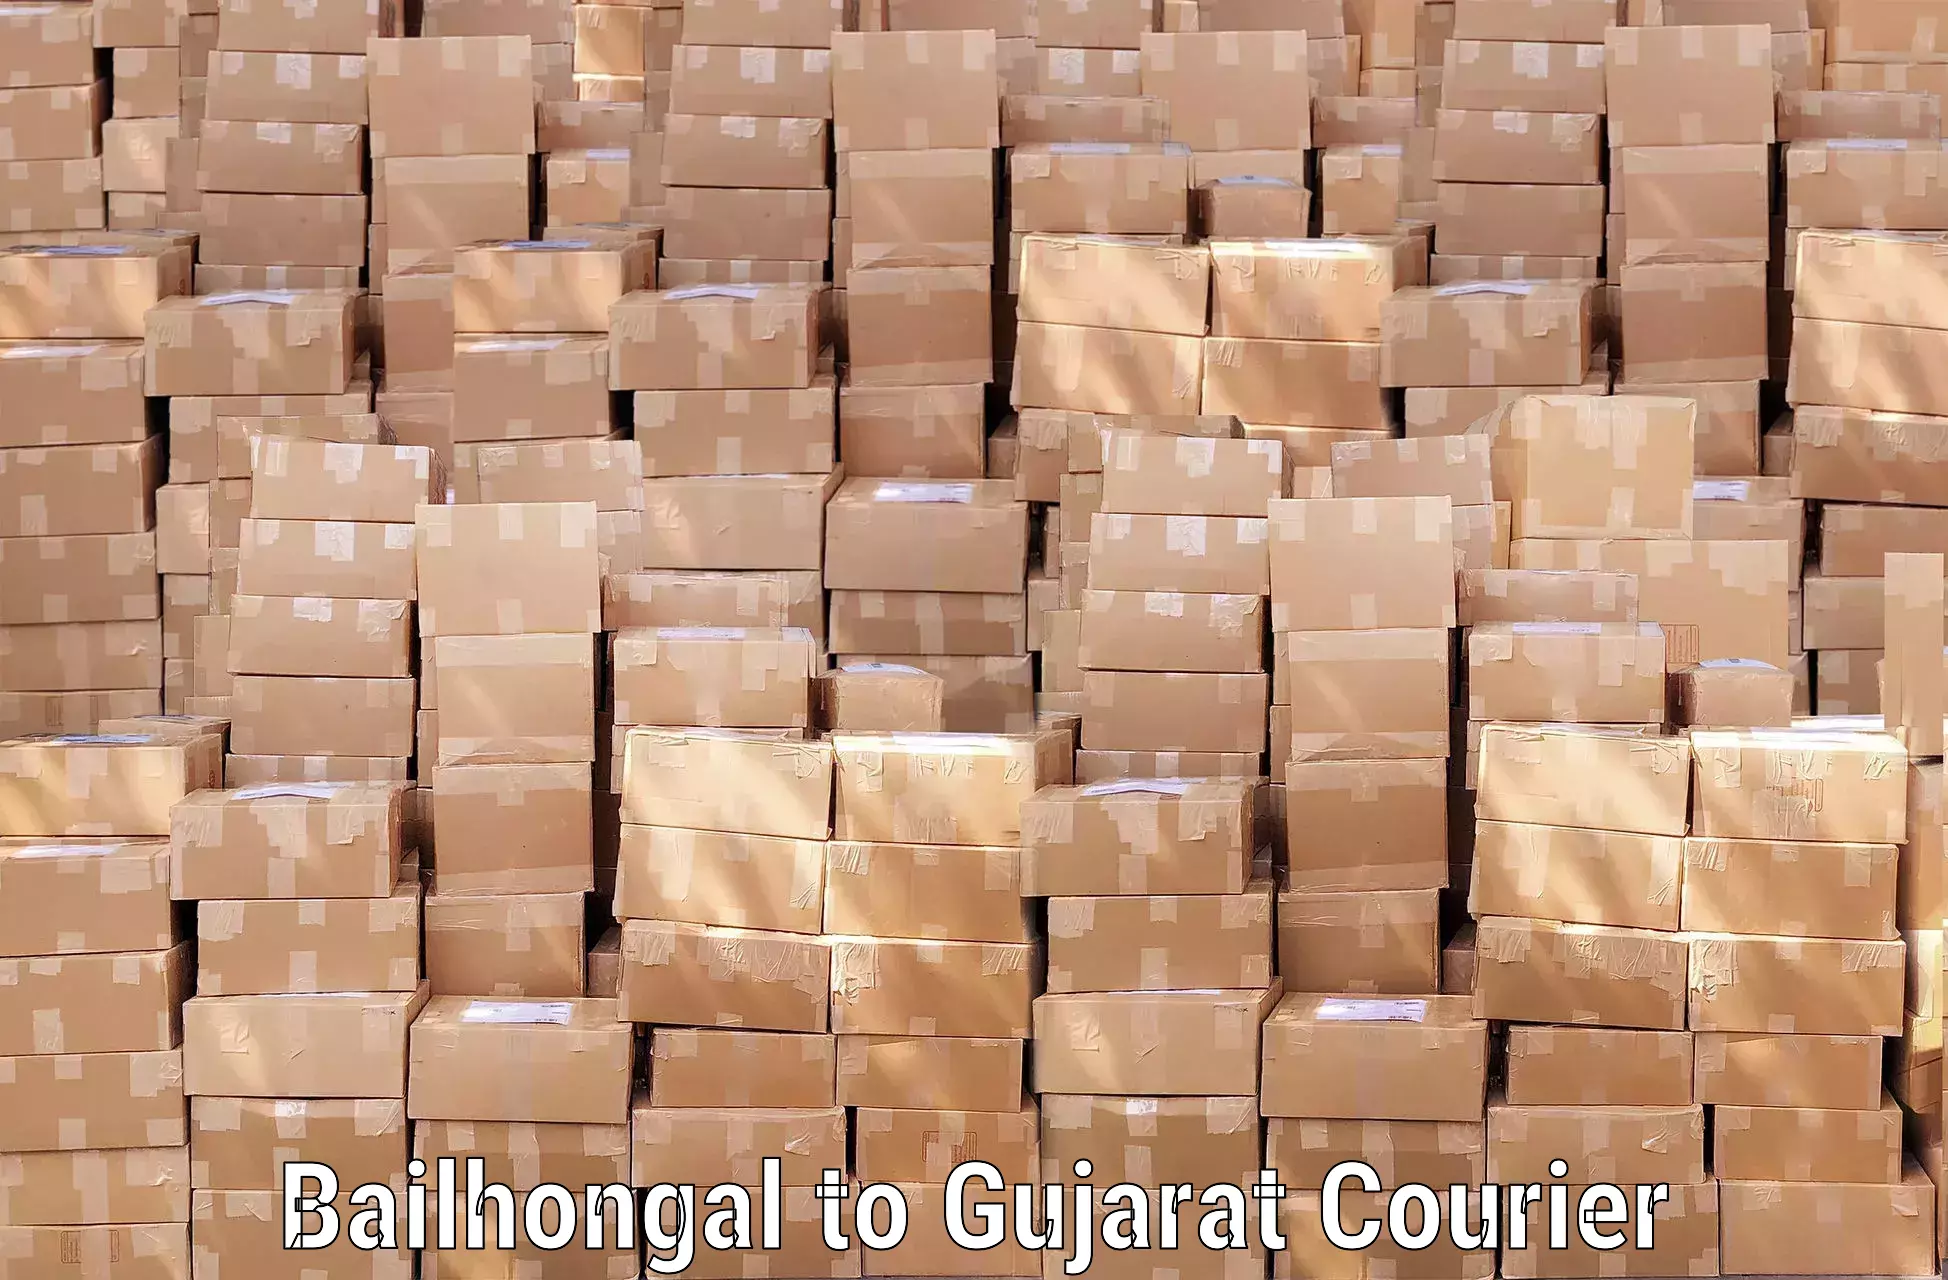 Luggage delivery network Bailhongal to Gujarat